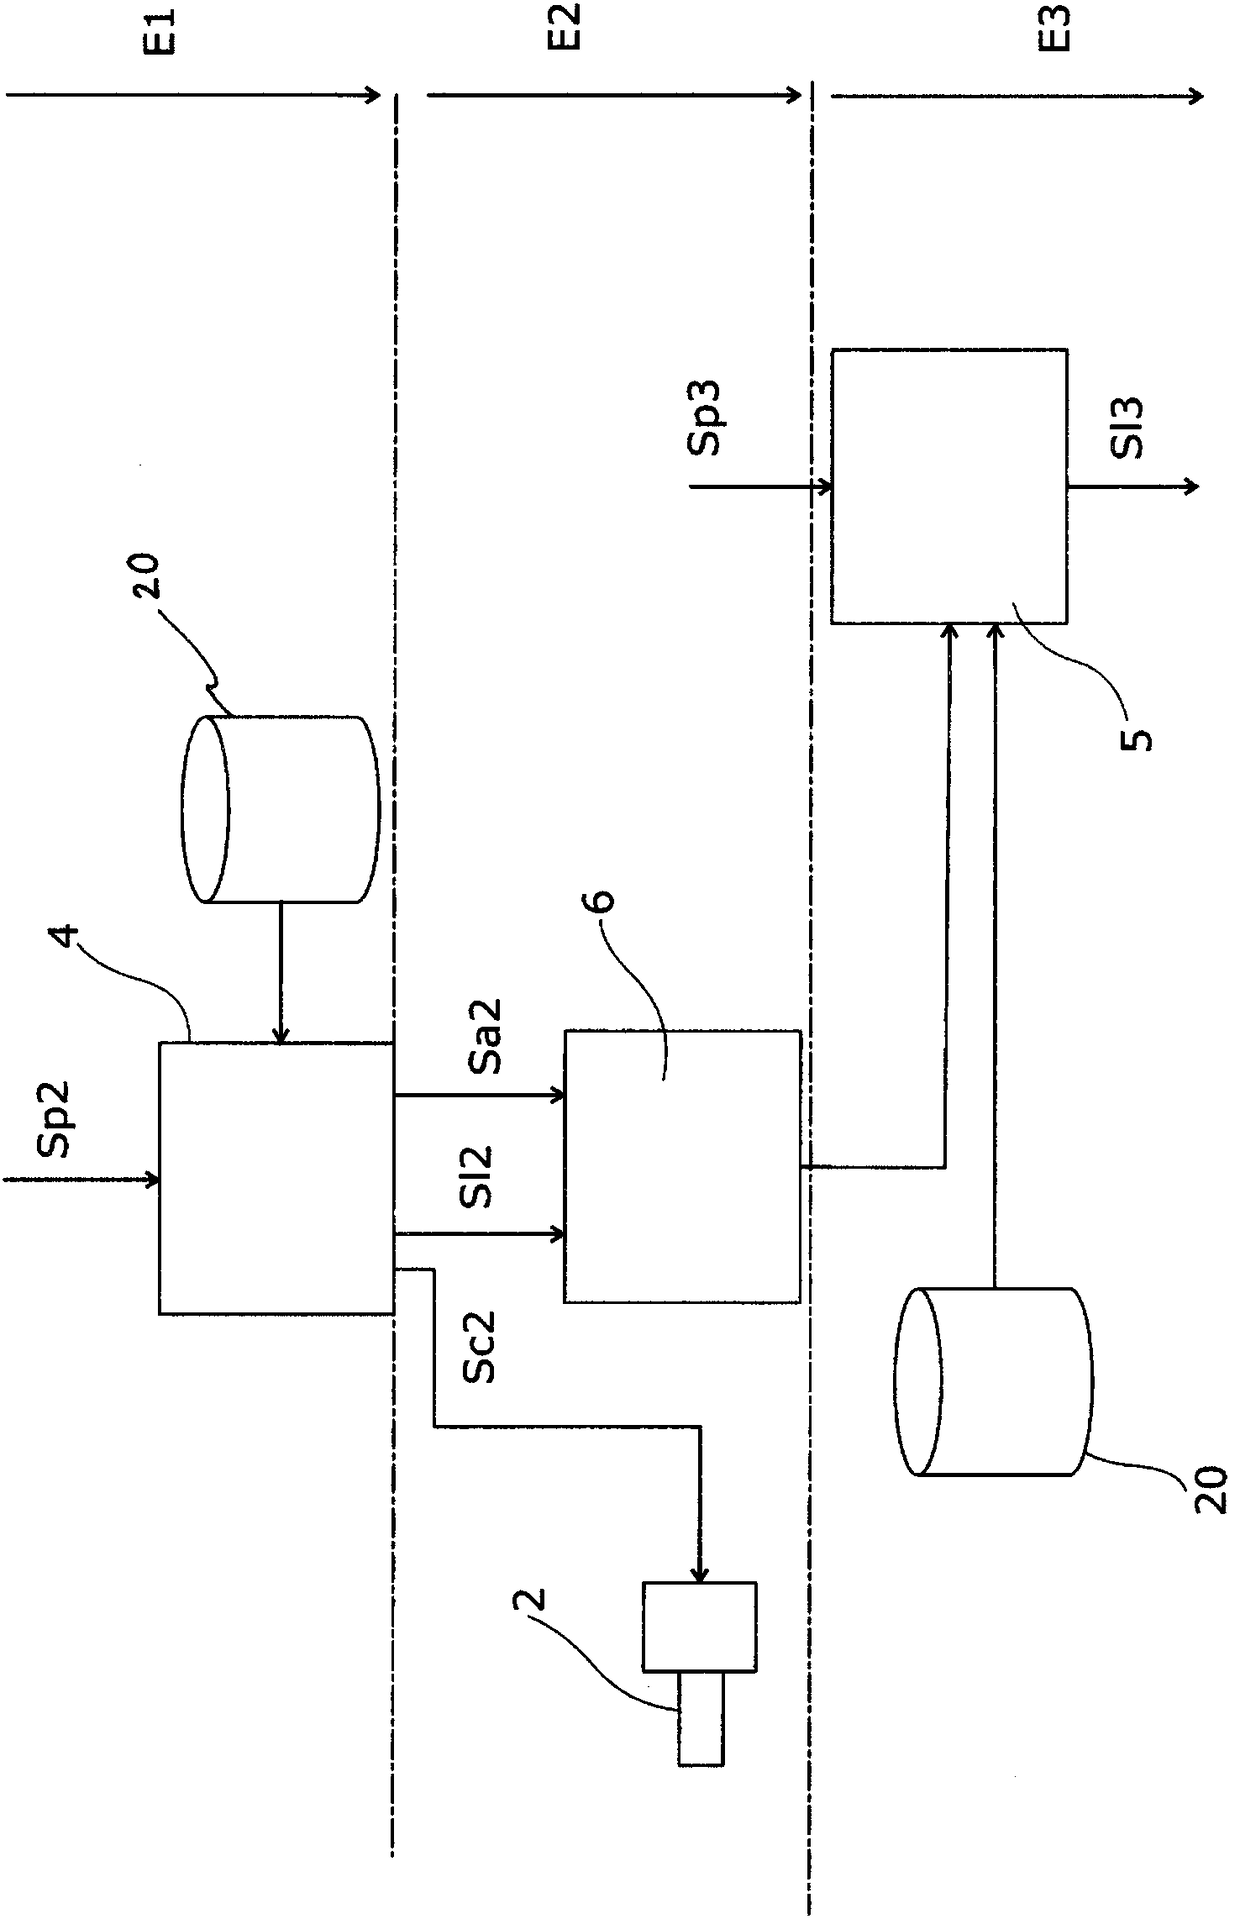 Method for automatically cutting off the engines of a twin-engine aircraft